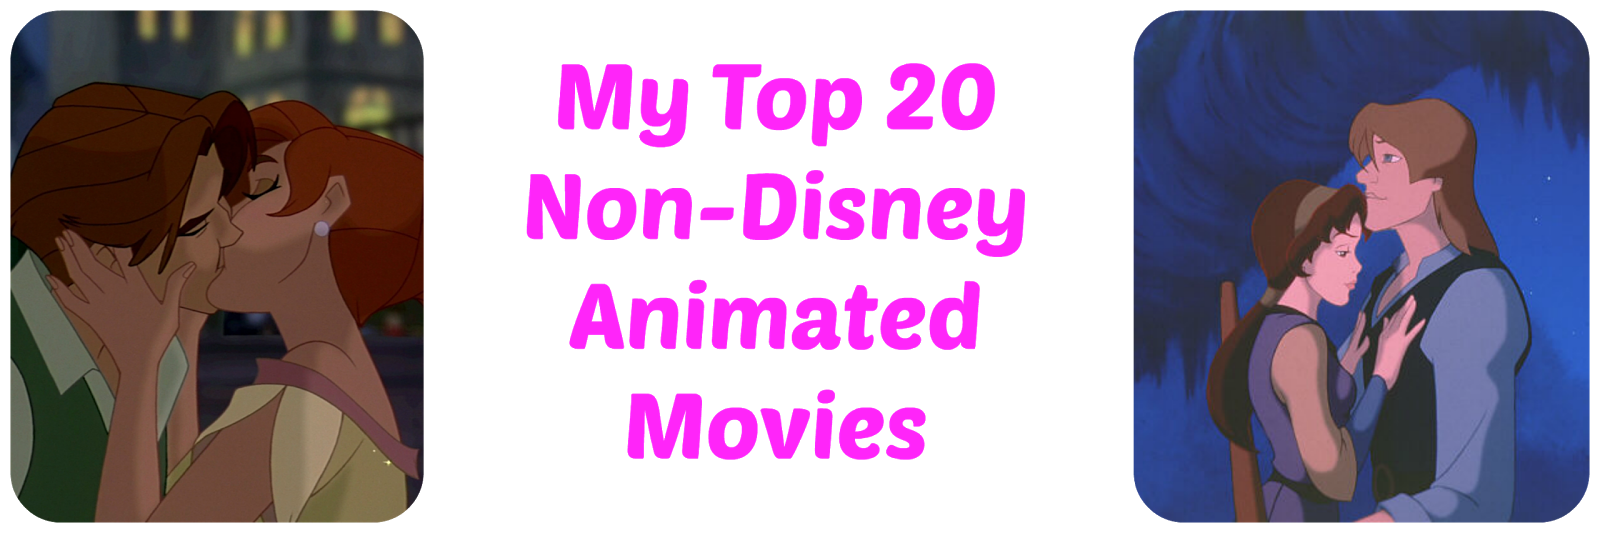 Reviews from a Bookworm: My Top 20 Non-Disney Animated Movies